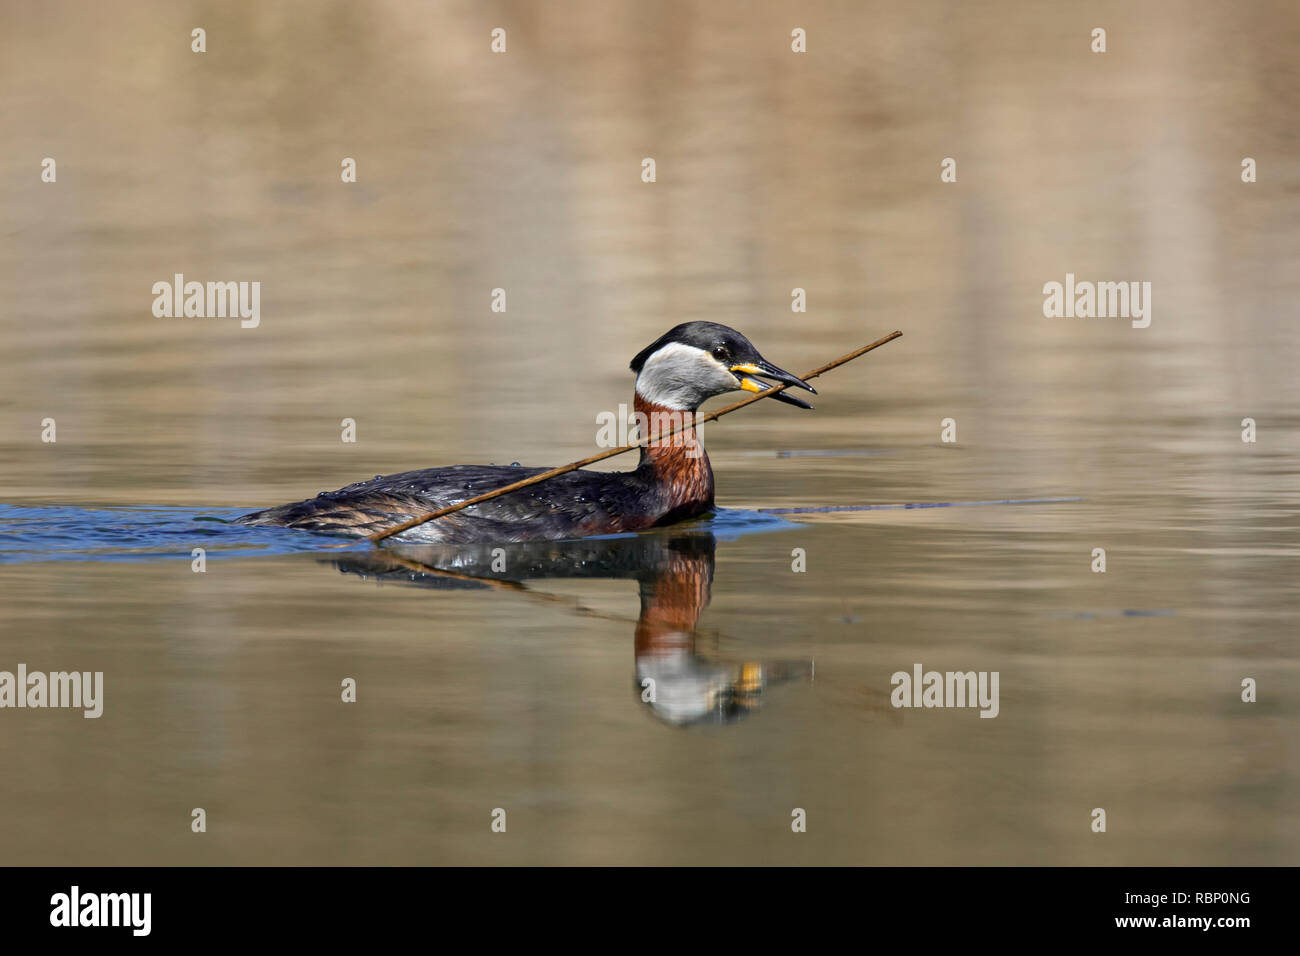 Red-necked grebe (Podiceps grisegena / Podiceps griseigena) swimming with twig in beak for nest building during the breeding season in spring Stock Photo